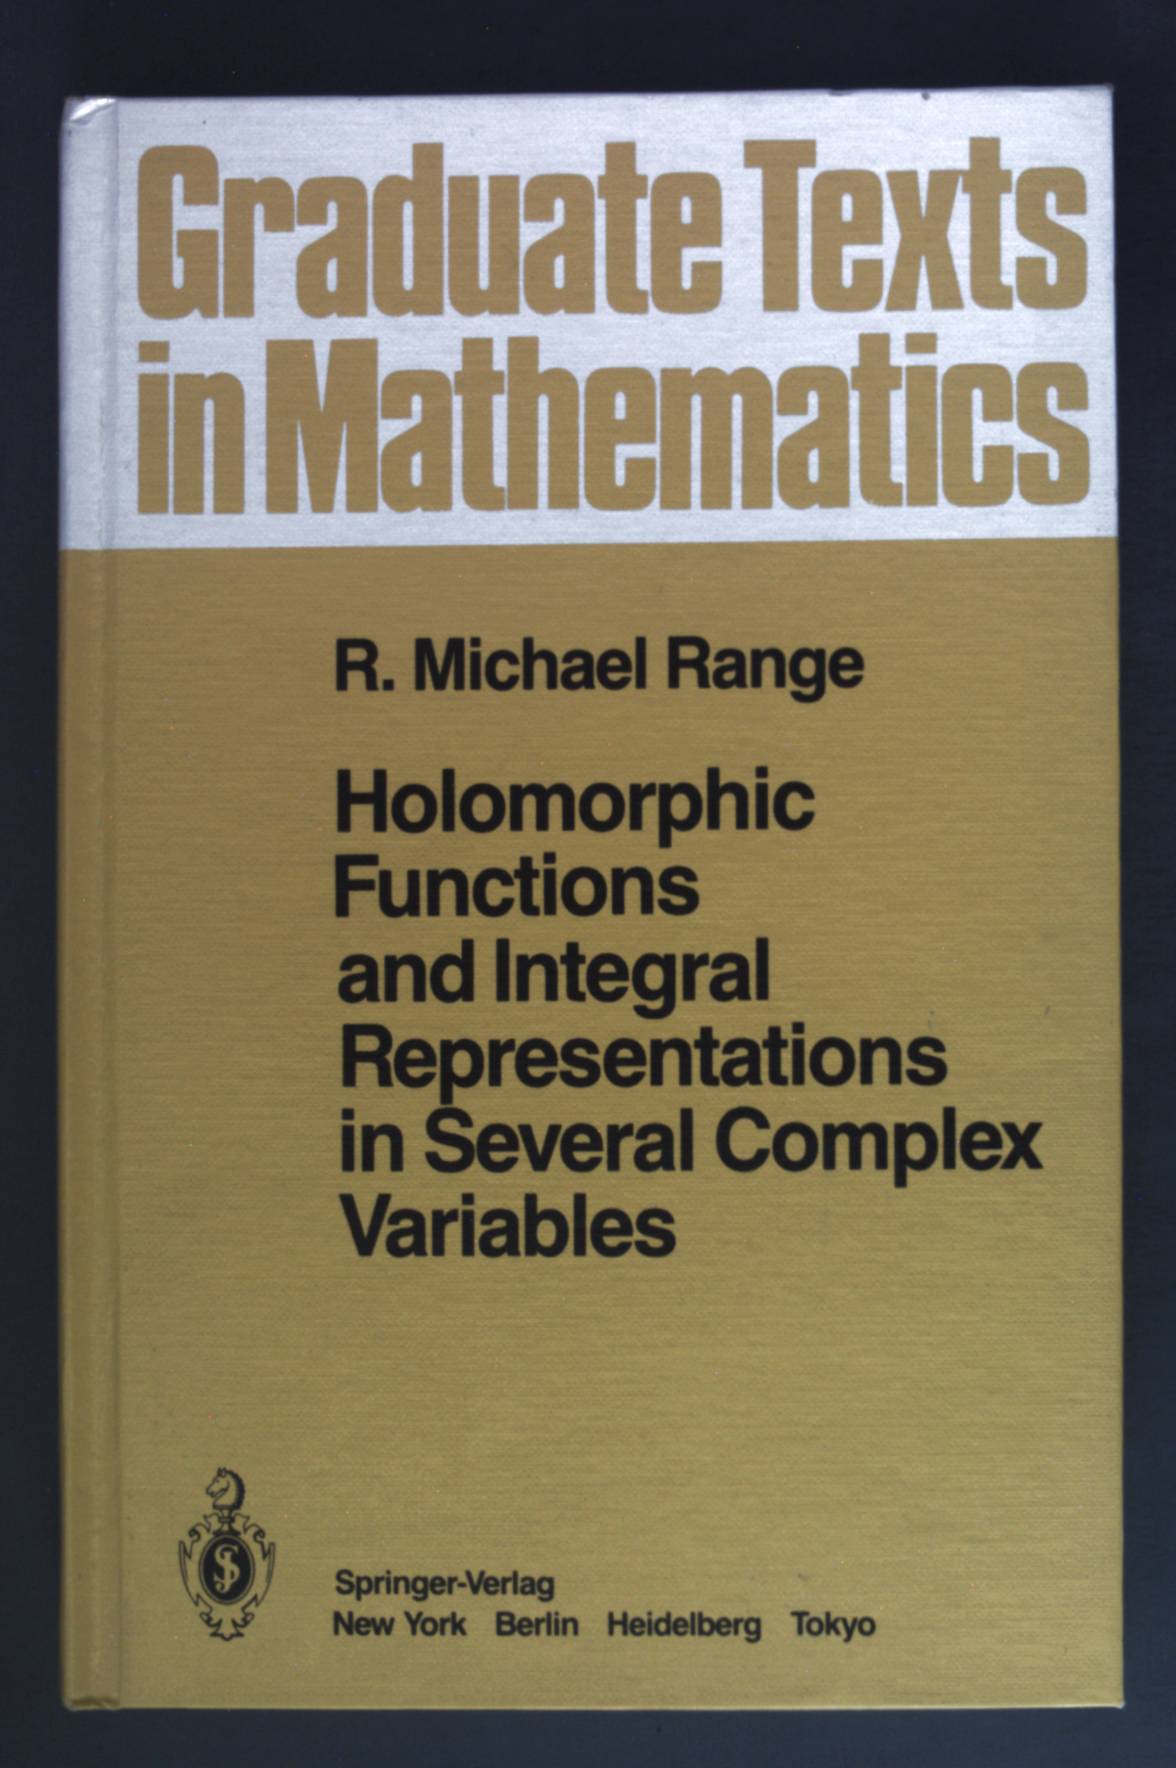 Holomorphic Functions and Integral Representations in Several Complex Variables. Graduate Texts in Mathematics 108 - Range, R. Michael